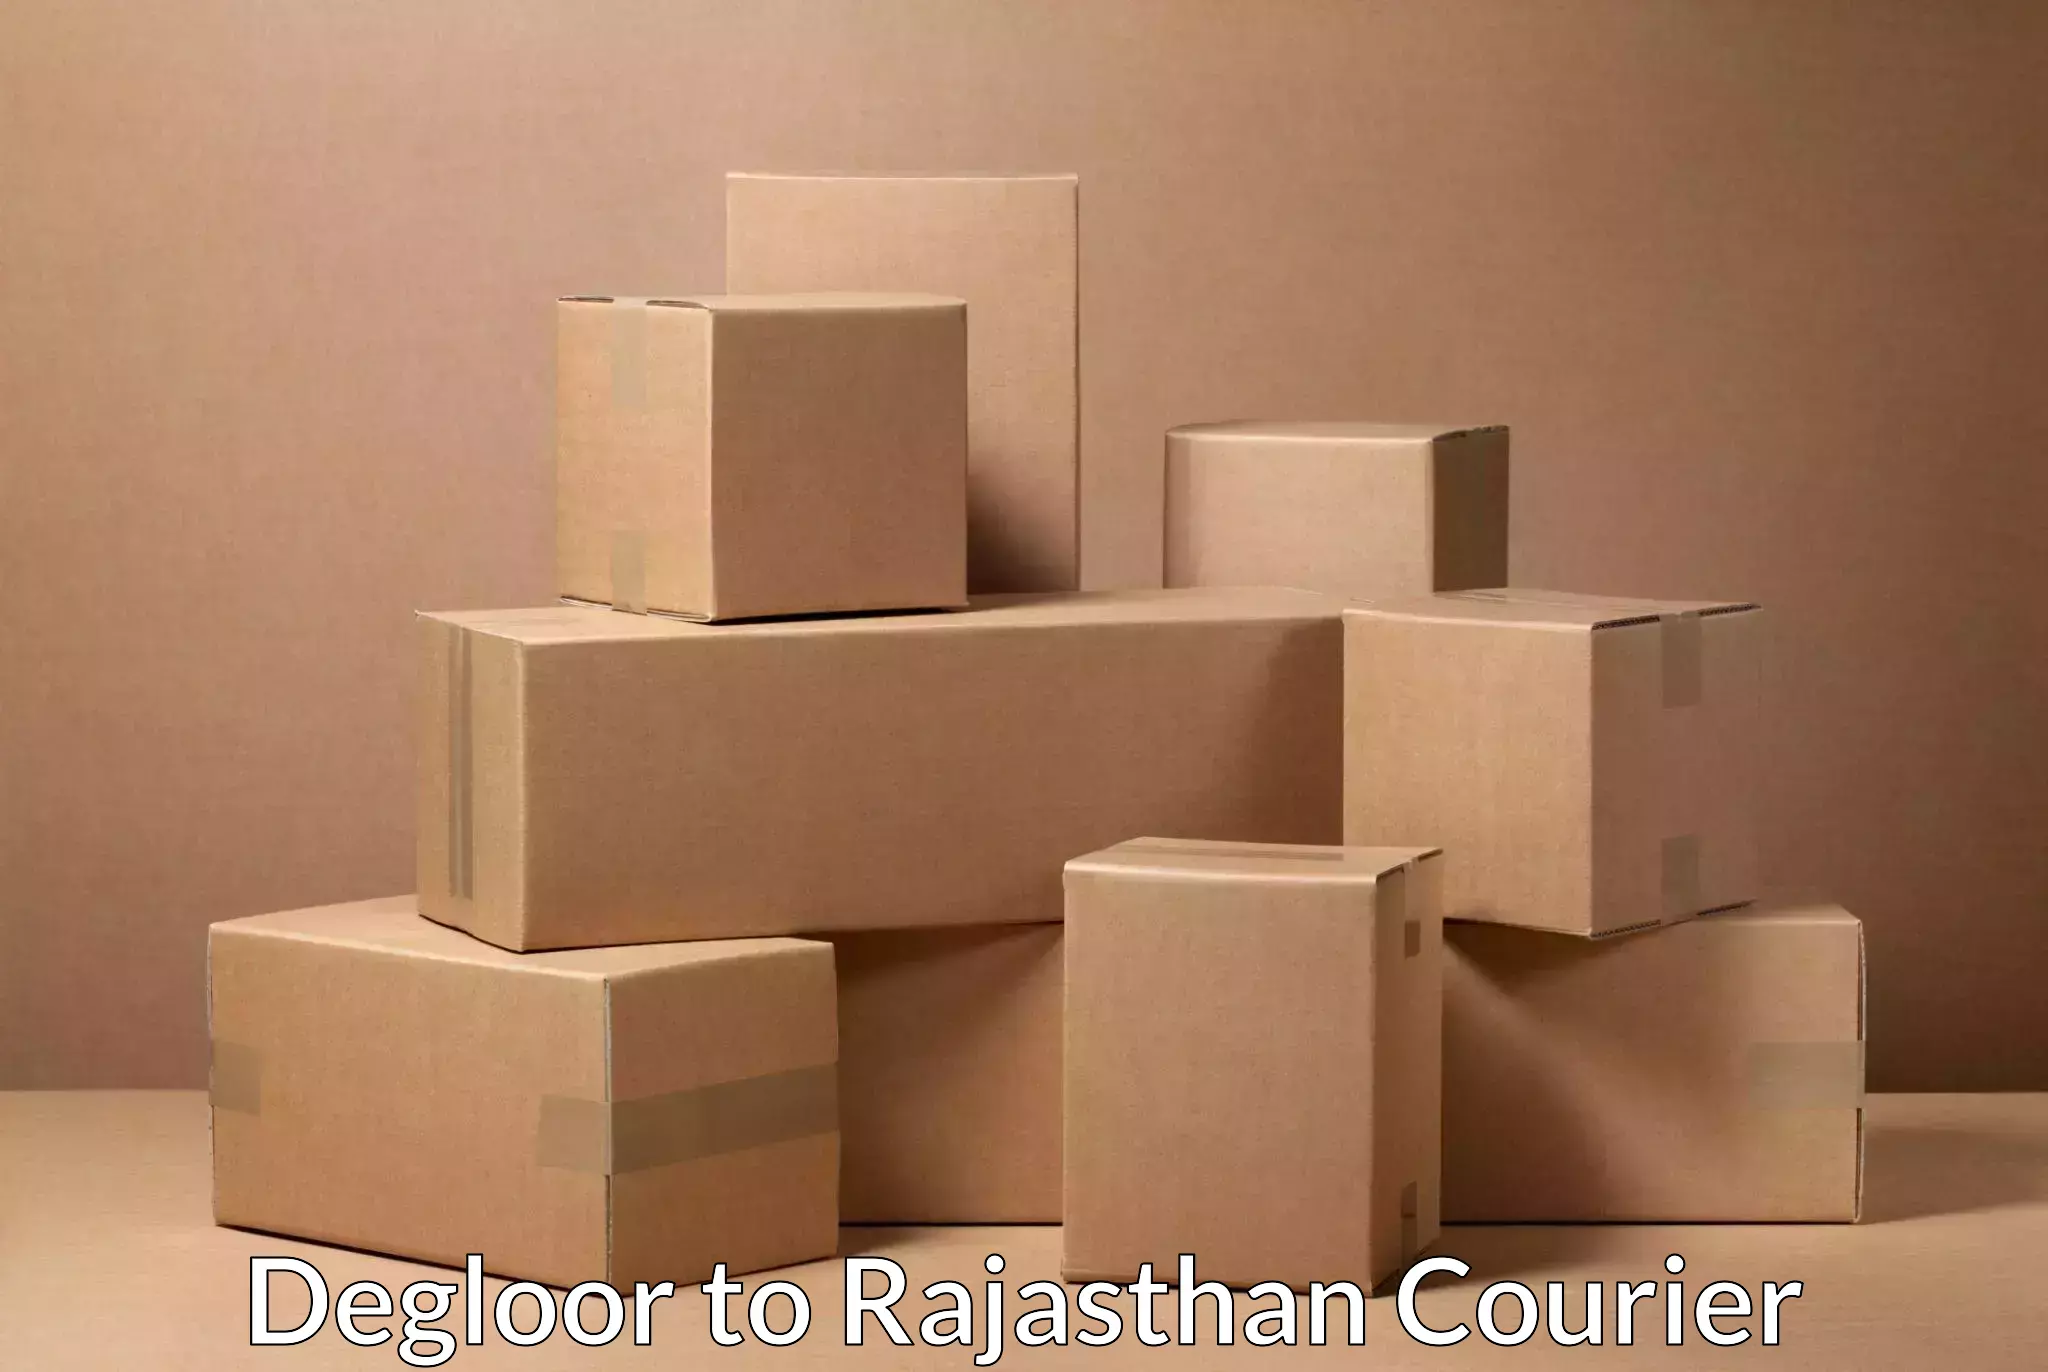 Courier service partnerships Degloor to Rajasthan